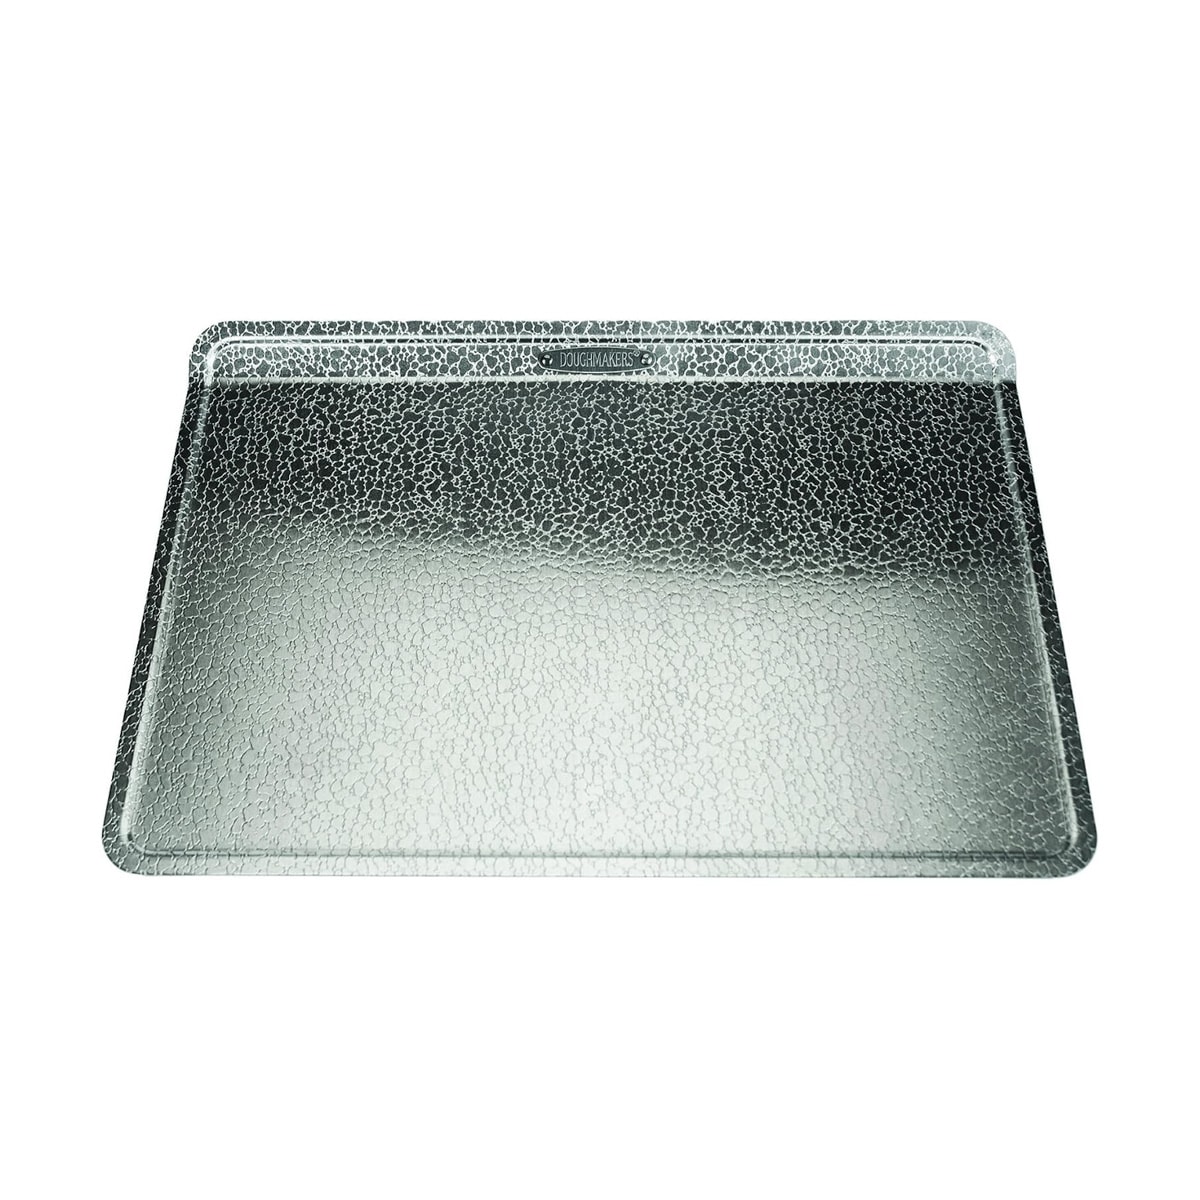 One doughmakers cookie sheet.